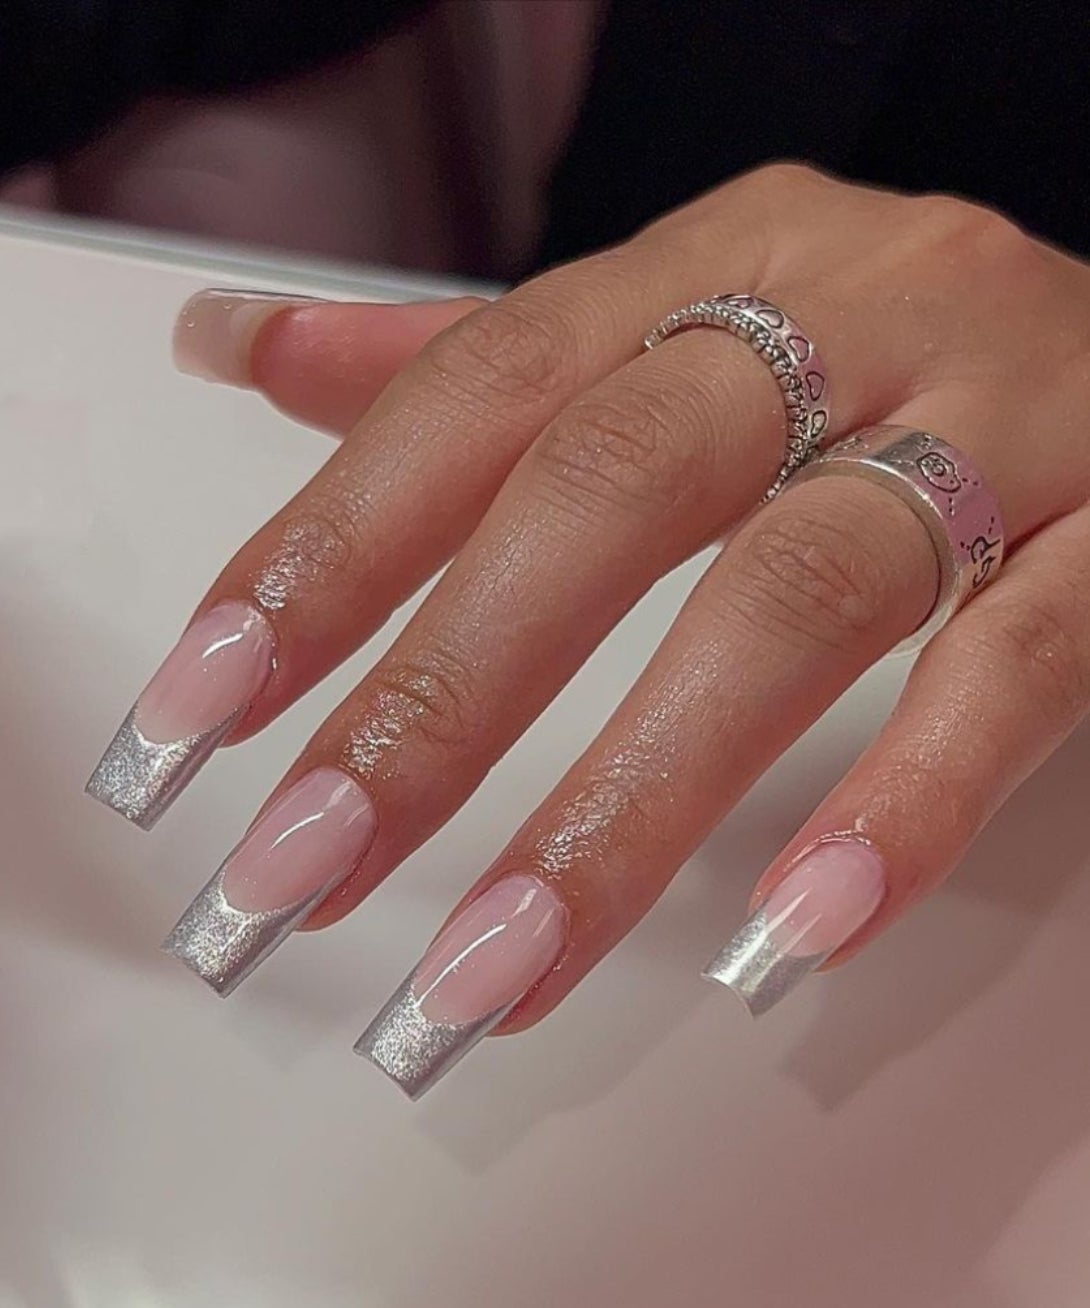 Everything You Need To Know About Acrylic Nails